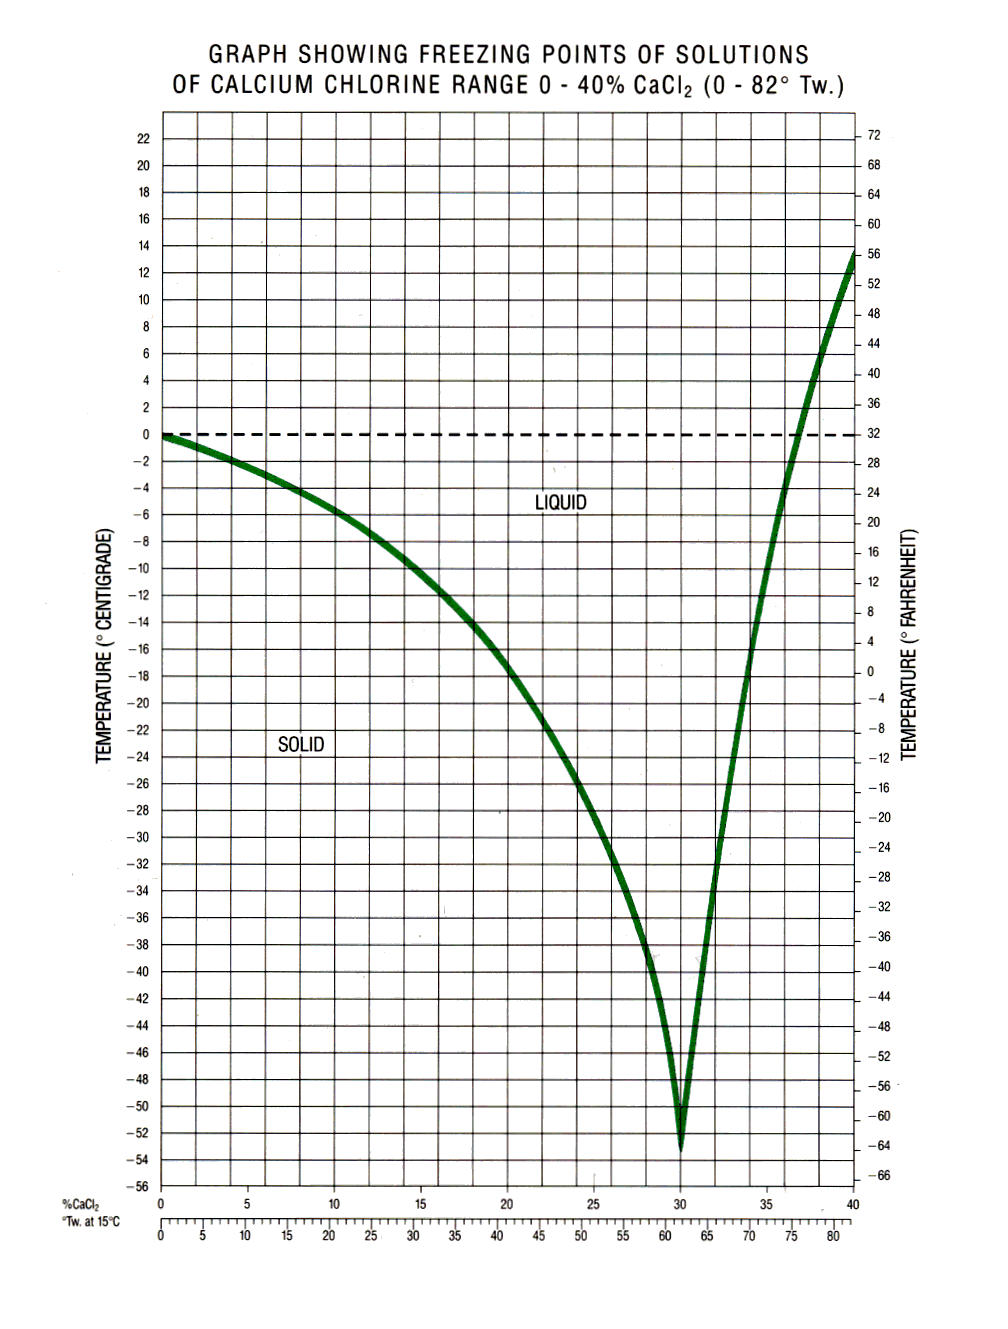 Calcium Chloride Freezing Point Chart